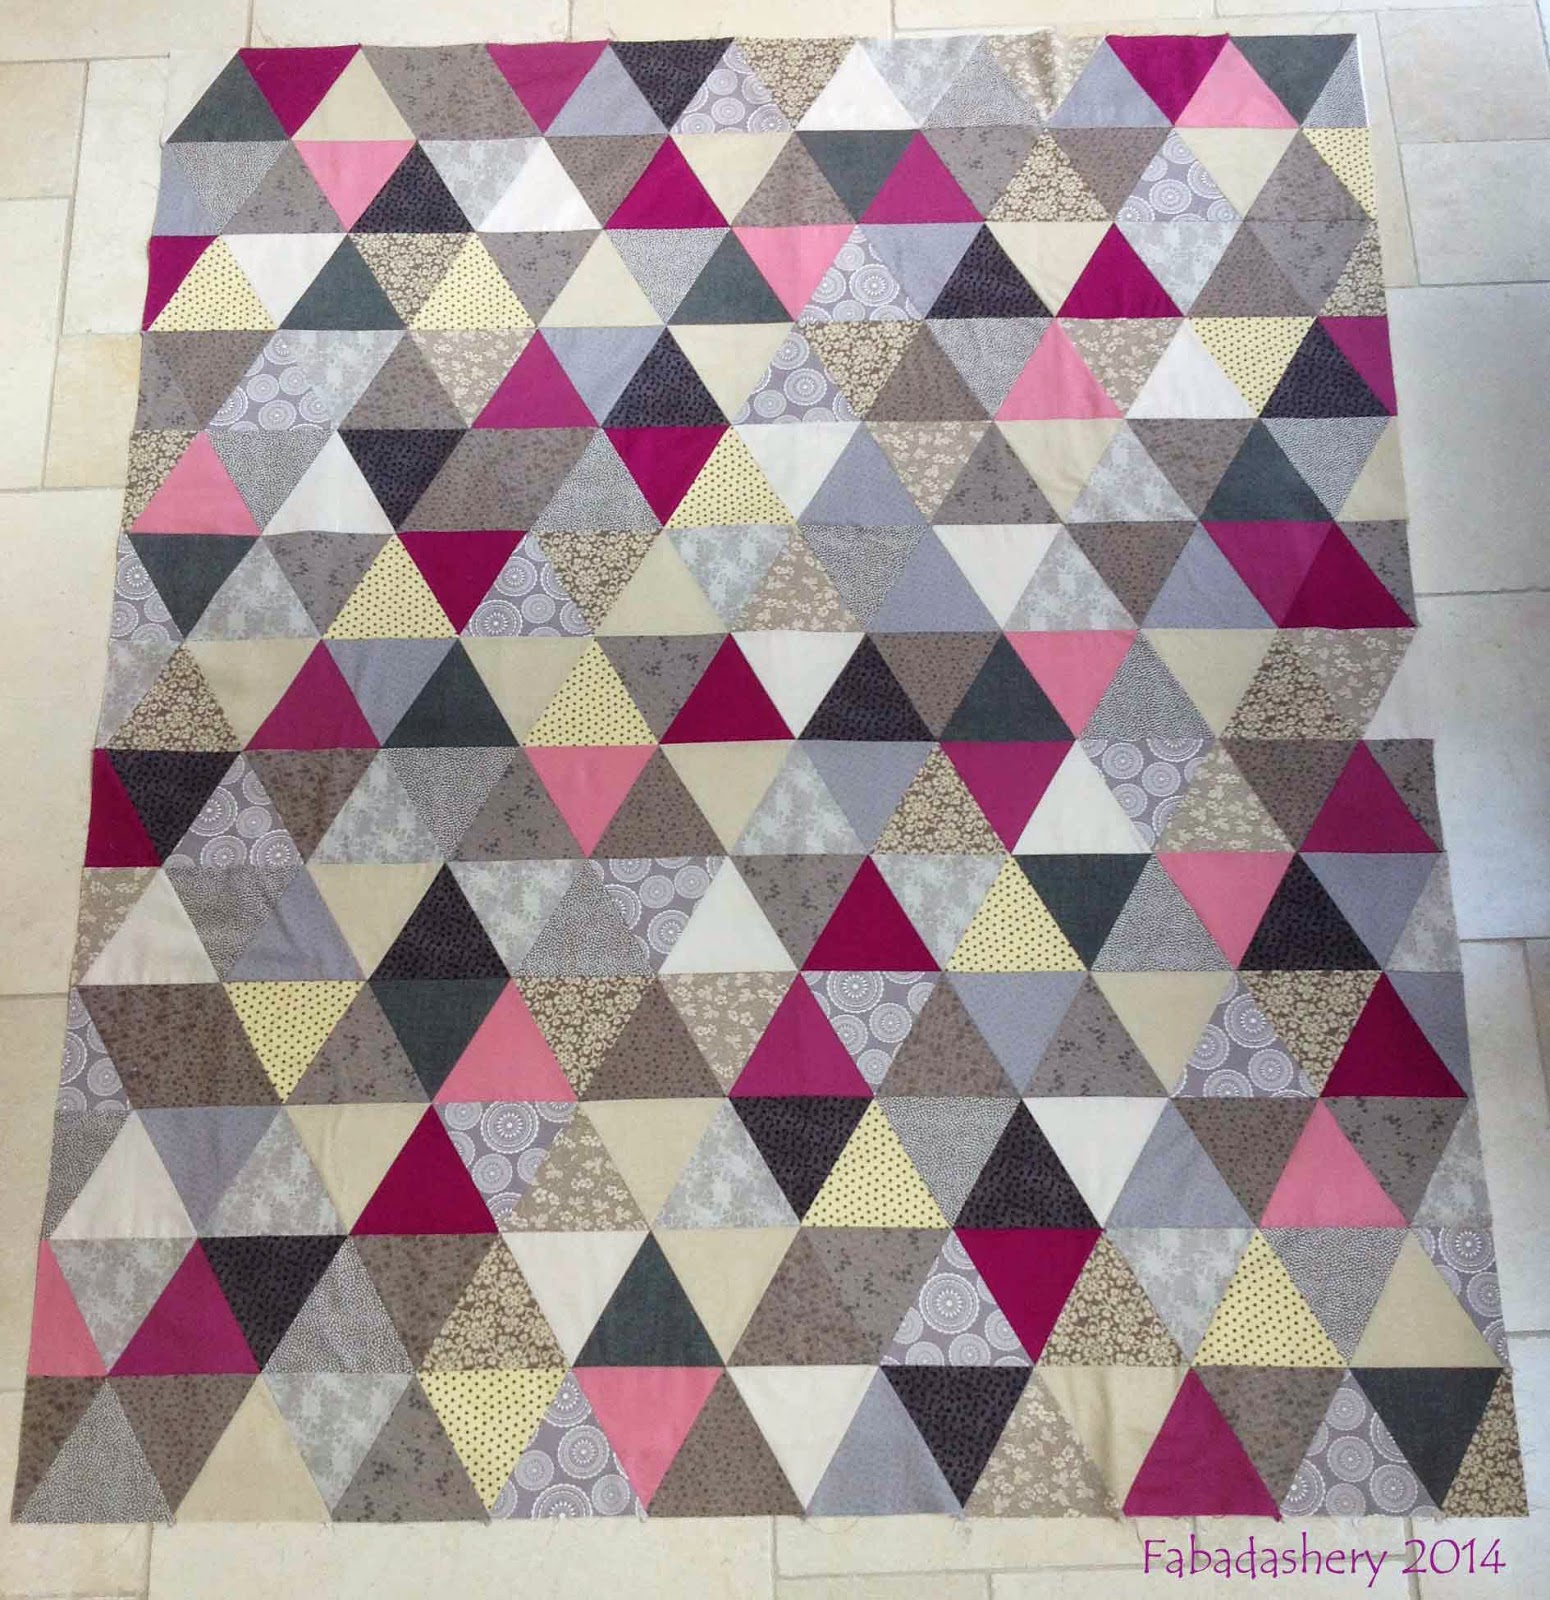 Equilateral Triangle Quilt